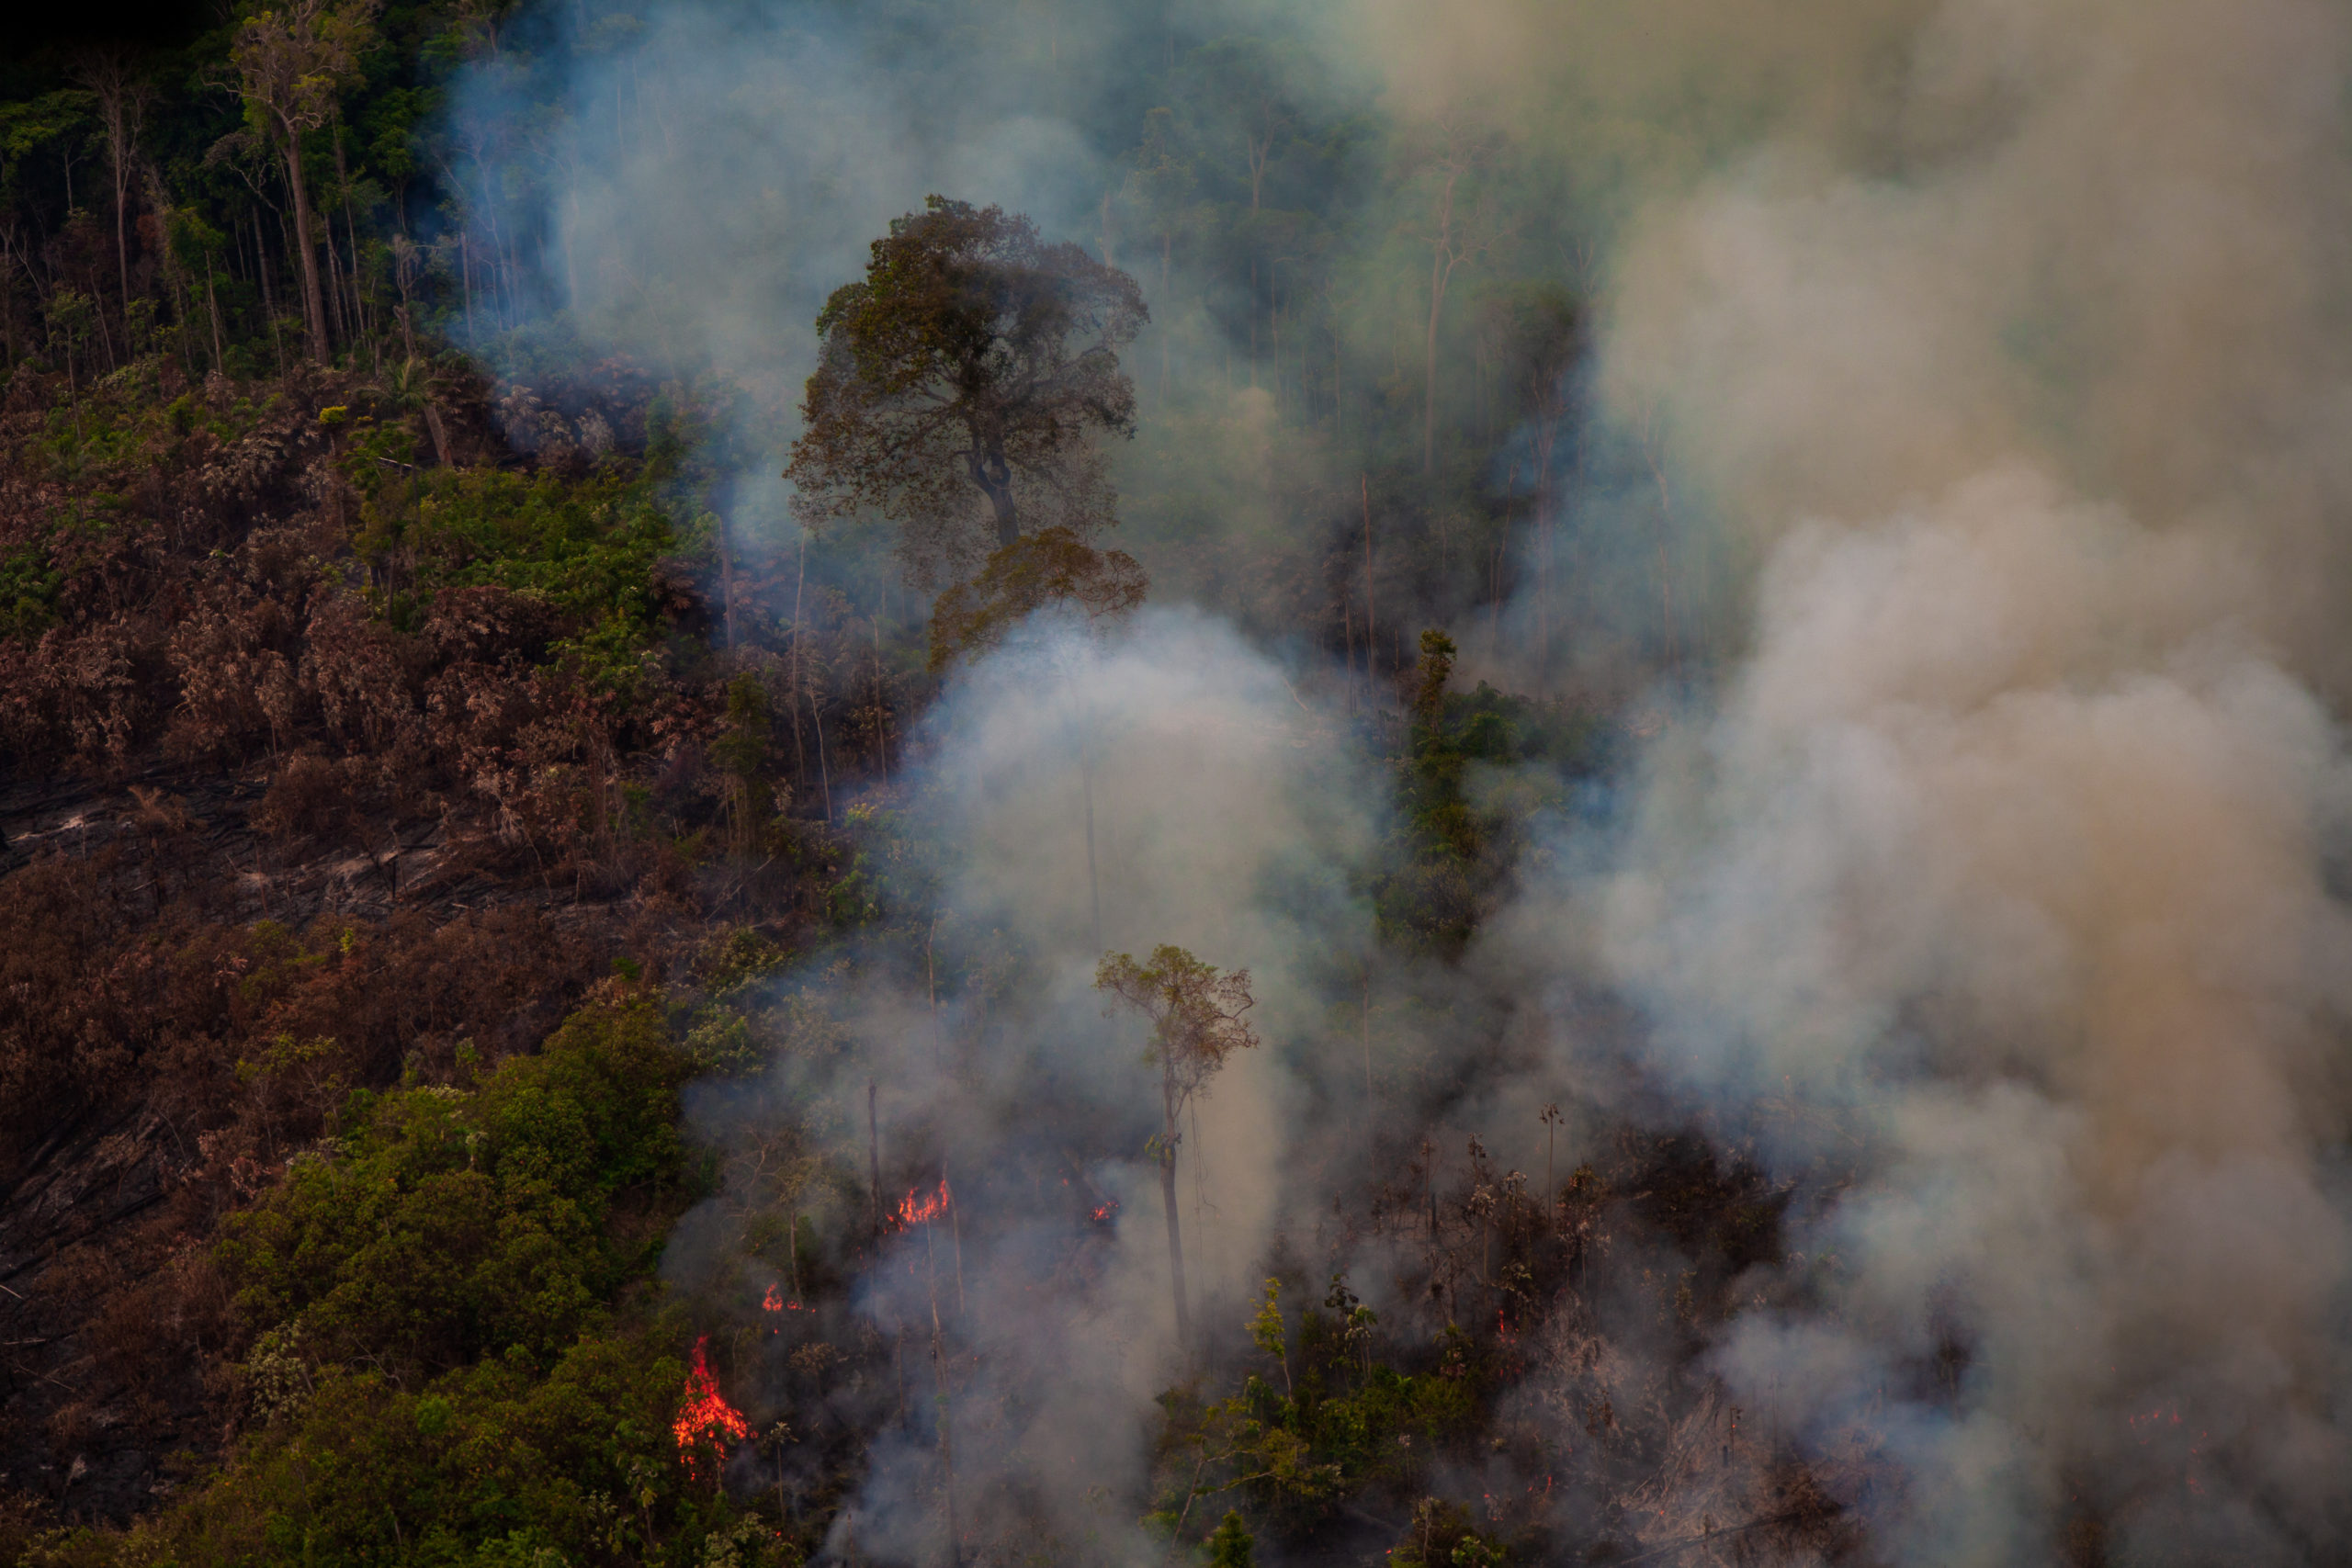 Fires burn bushes and trees in Jamanxim National Forest in Brazil, billowing smoke